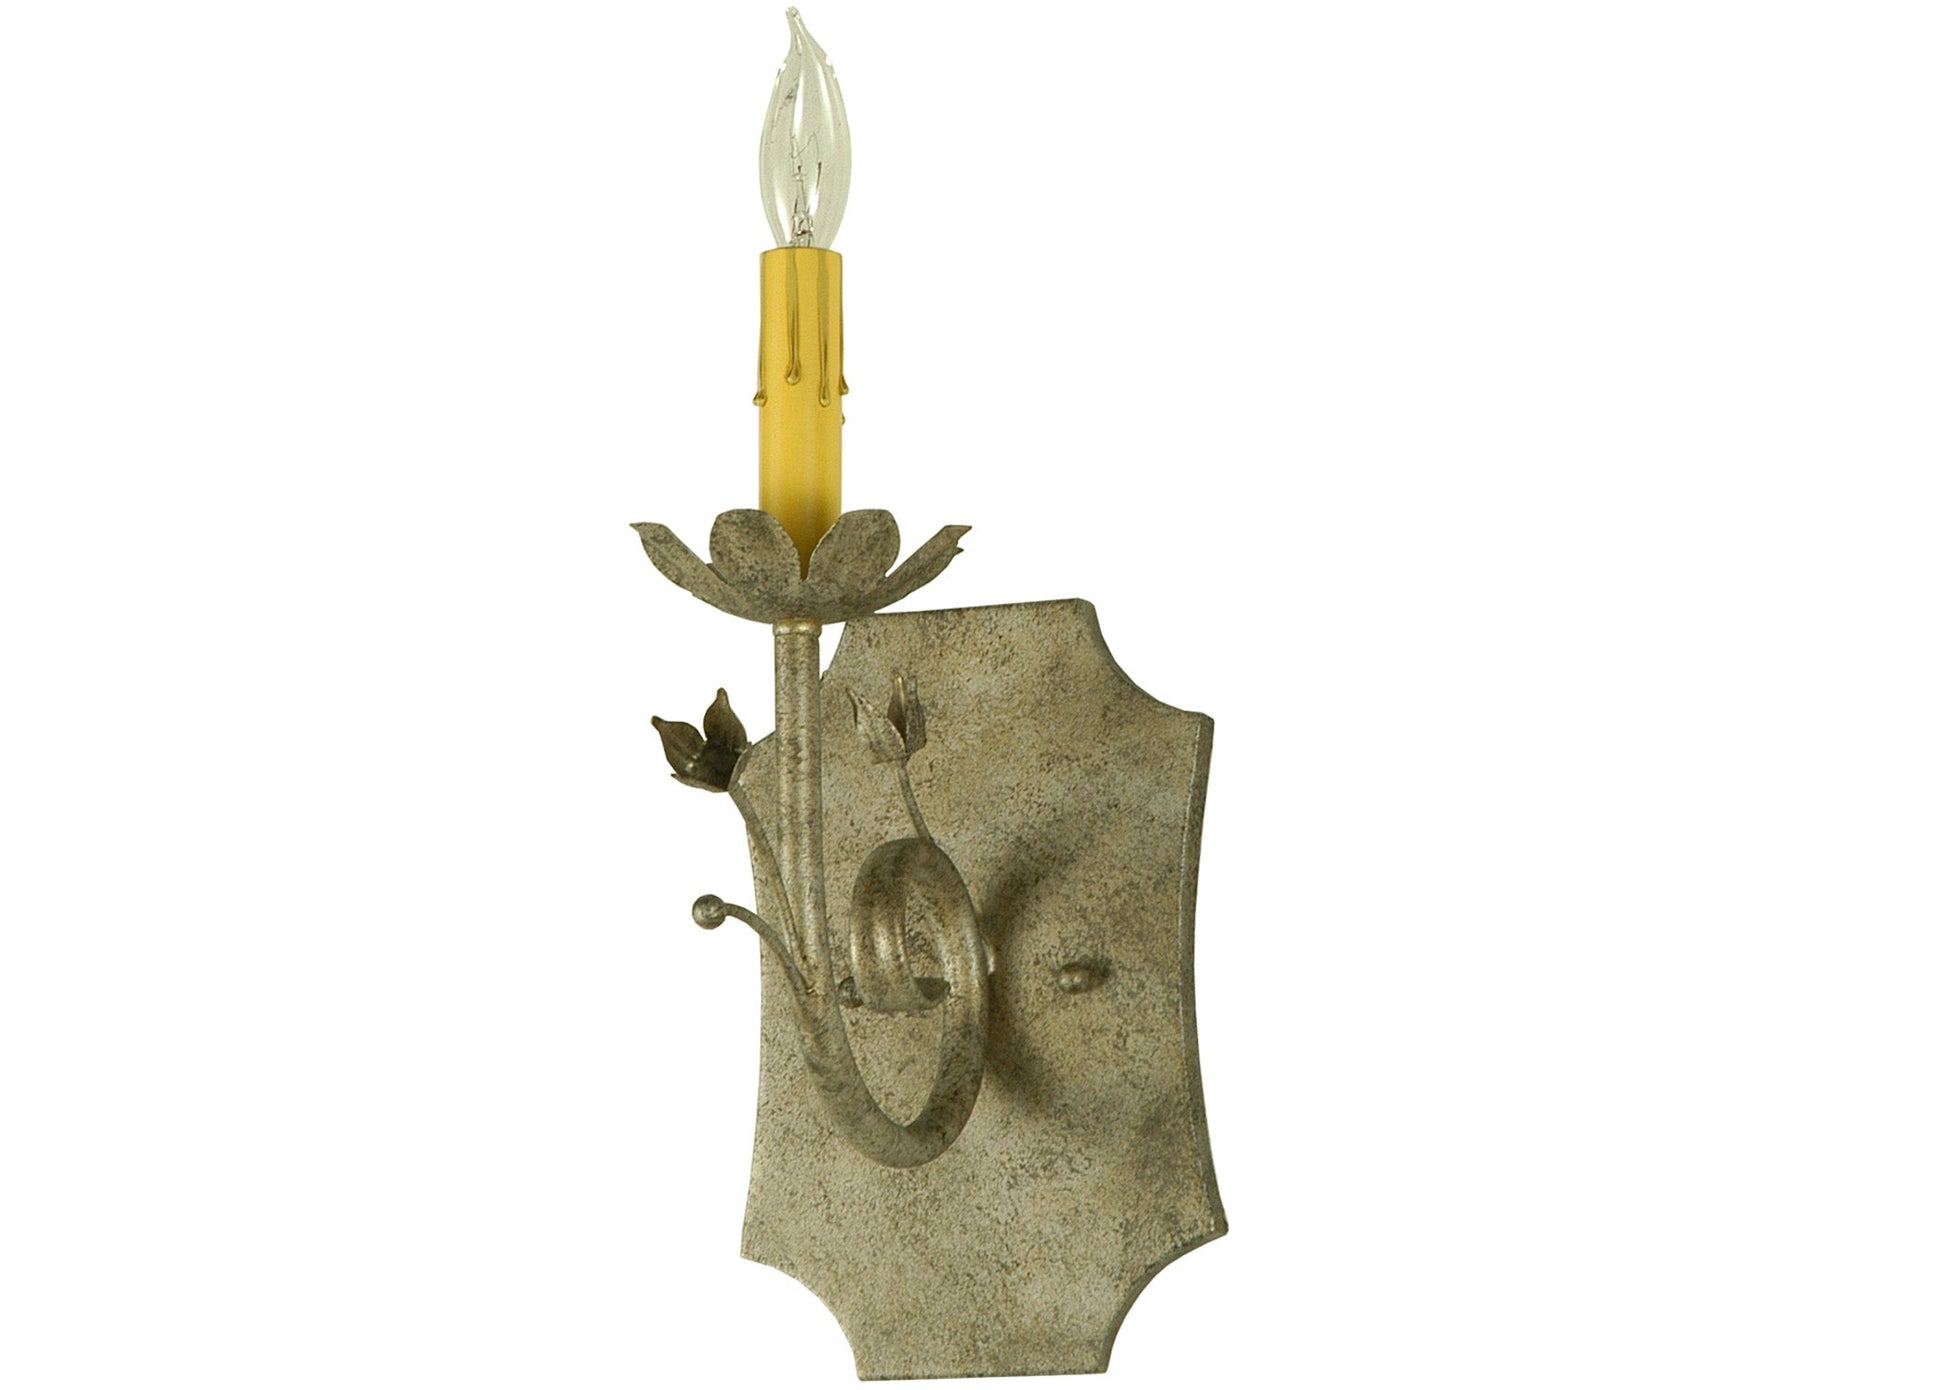 6" Lynda Wall Sconce by 2nd Ave Lighting